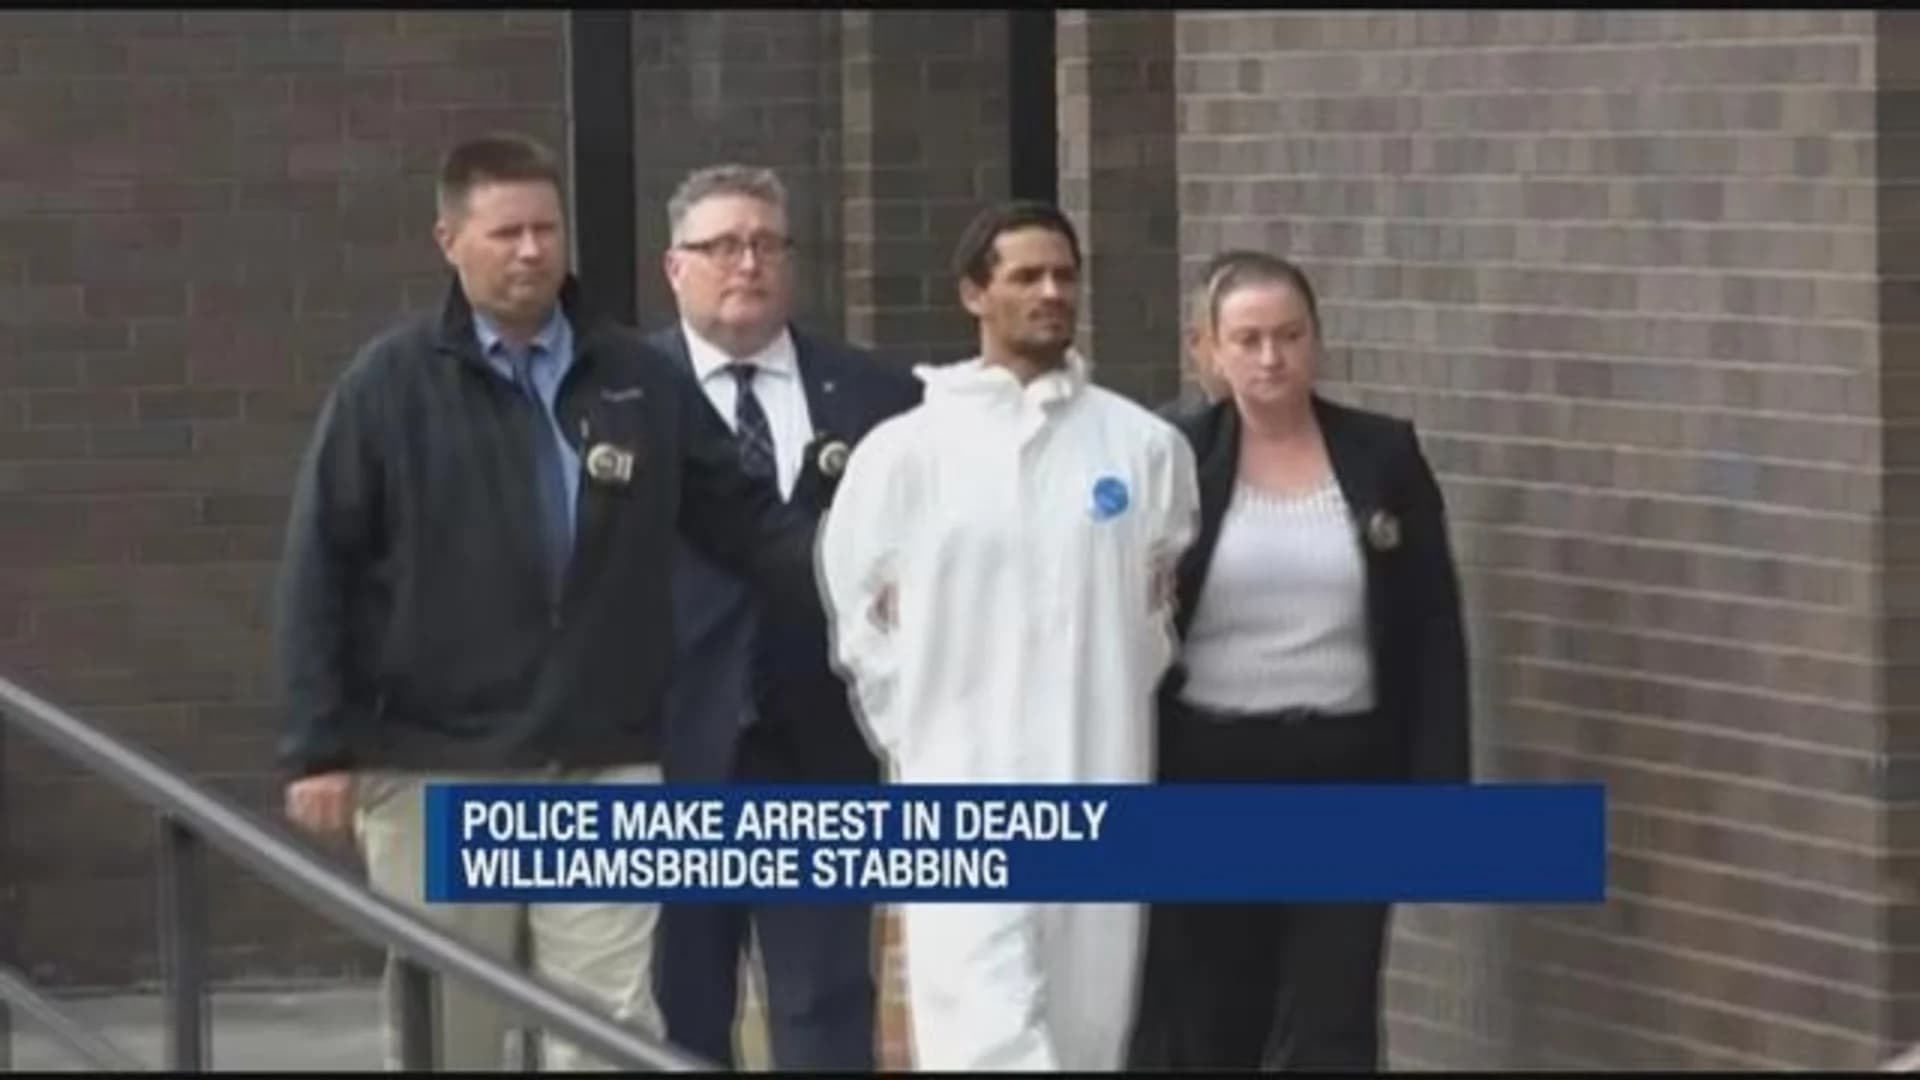 Police: Williamsbridge man stabbed person he lived with to death